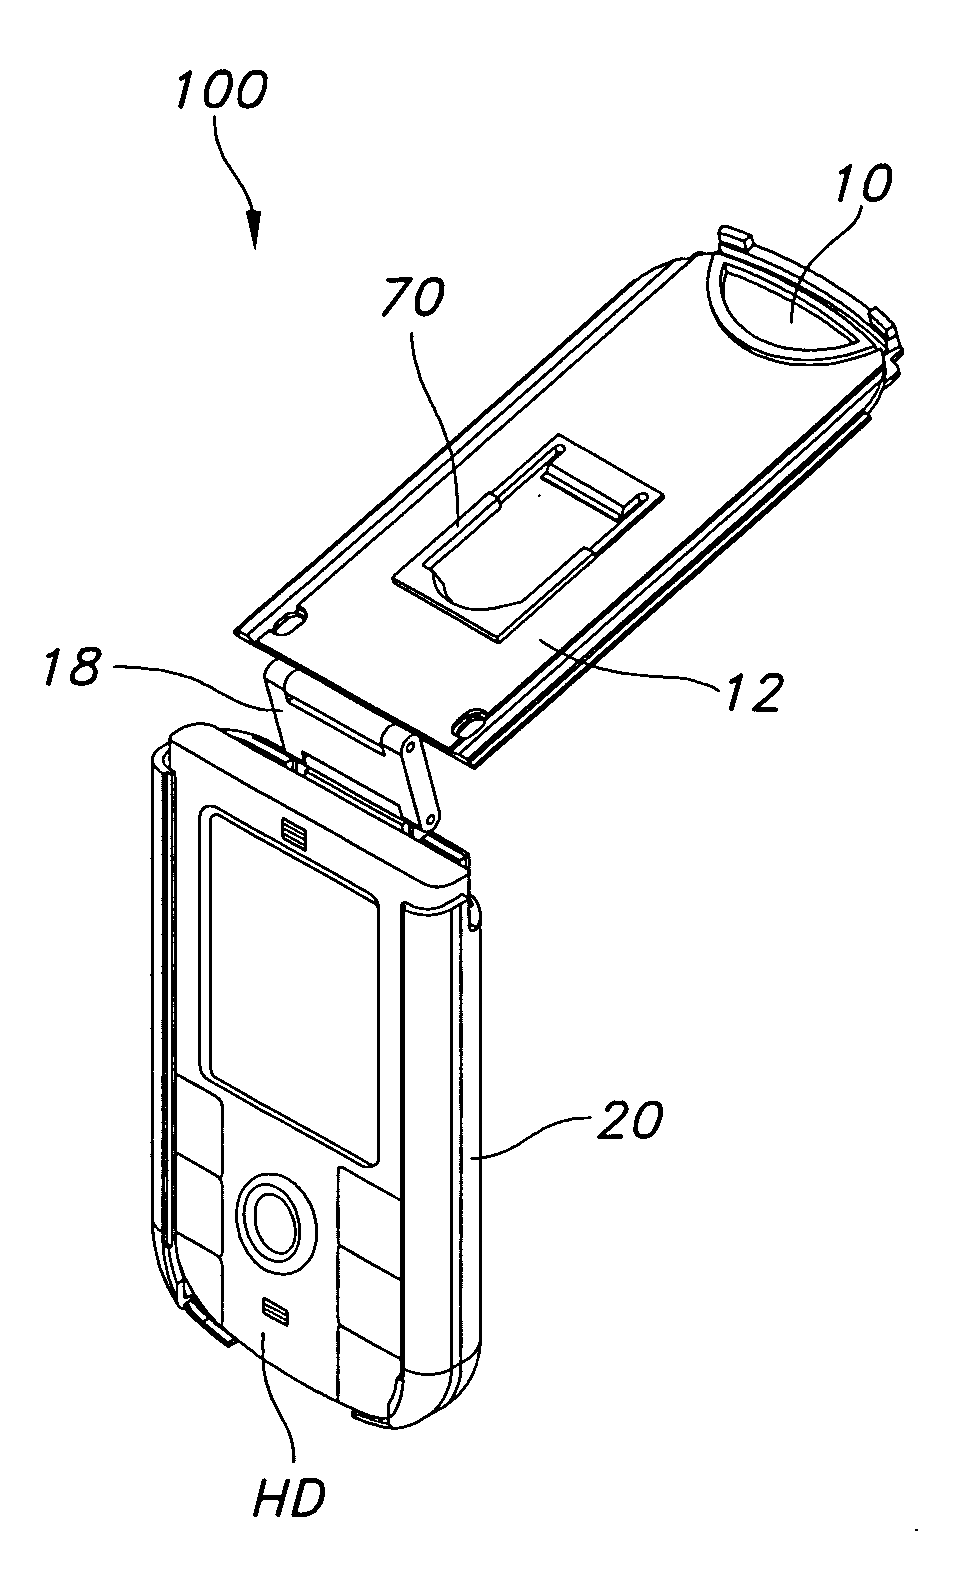 Water-resistant combination case for handheld electronic devices